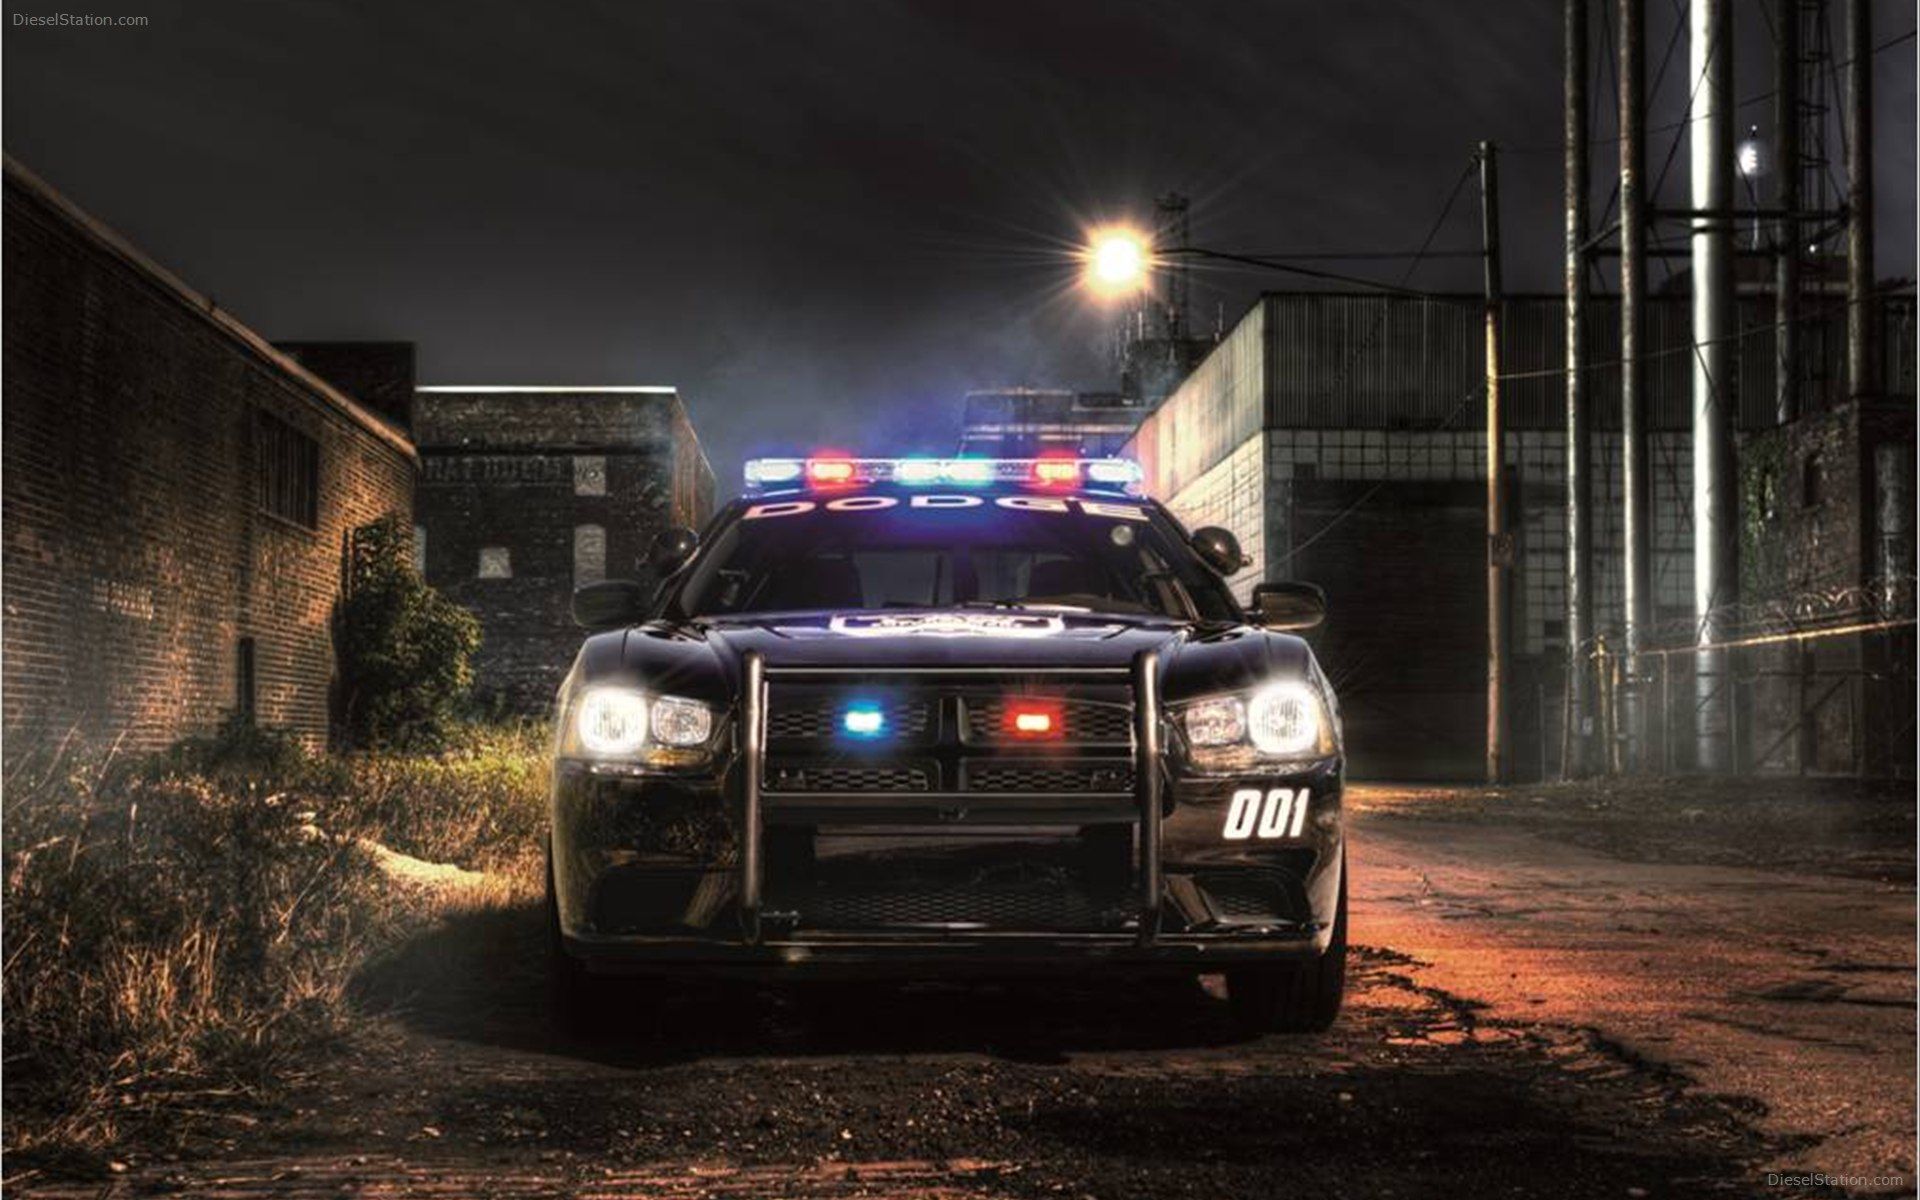 The Police Wallpaper. Police Car Wallpaper, The Police Wallpaper and Police Wallpaper